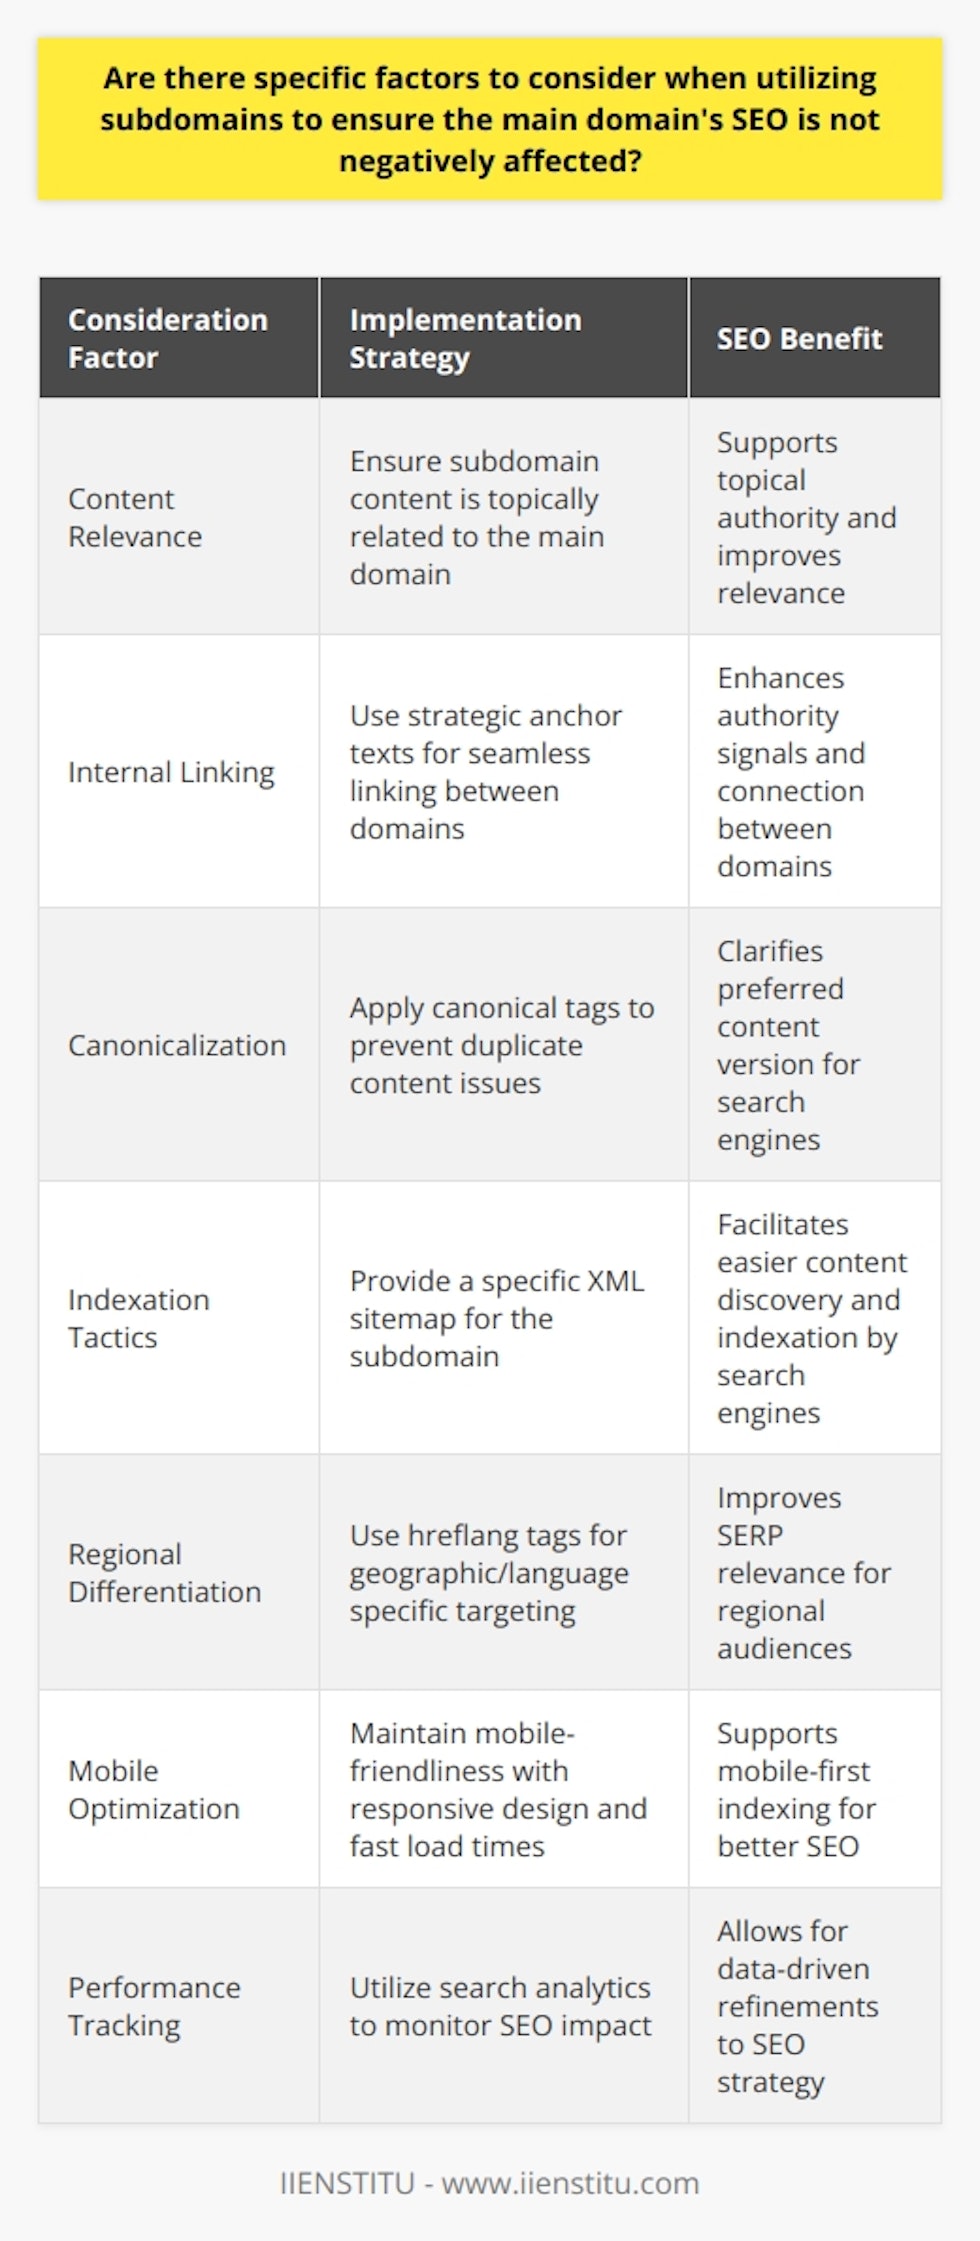 When it comes to leveraging subdomains from an SEO perspective, it's crucial to handle them with care to maintain or even boost the SEO strength of the main domain. Below are targeted considerations that should guide your strategy:Content Relevance:The subdomain should carry content that complements or adds value to the main domain's topics. It's important for the subdomain to remain within the semantic field of the main domain to support the topical authority of your entire web presence.Internal Linking:Links should flow naturally between the main domain and the subdomain. Strategic use of anchor texts that correspond with the keywords targeted by both the main domain and subdomain can reinforce the relationship between them and enhance the authority signals sent to search engines.Canonicalization:Employ canonical tags on your subdomain to ward off any potential duplicate content flags that may arise. Properly implemented canonical tags help search engines recognize which version of the content to prioritize, ultimately safeguarding your main domain's SEO integrity.Indexation Tactics:Make it effortless for search engines to discover and index your subdomain by generating and submitting an XML sitemap specific to it. This action helps clarify the structure of your subdomain and its content offerings.Regional Differentiation:When a subdomain is intended for a specific region or language group, the appropriate use of hreflang tags for both the main domain and subdomain is critical. This informs search engines about the geographical or linguistic targeting, thus improving the relevance and performance of SERPs for users from different areas.Mobile Optimization:The subdomain must not lag behind in mobile optimization, as search engines often use mobile-first indexing. To deliver a positive impact on the main domain's SEO, the subdomain has to provide an excellent mobile user experience, with fast load times and adaptable design elements.Performance Tracking:Monitor your SEO metrics regularly by deploying tools designed for search analytics. Pay attention to how the subdomain influences the main domain's SEO profile and be ready to refine your strategy where analytics suggest potential or actual SEO fallout.By paying attention to these key aspects of subdomain management, you can ensure that any subdomains you create become assets rather than liabilities to your main domain's SEO landscape. These advanced insights contribute to a holistic view of how subdomains interact with your primary domain and play a critical role in maintaining a robust and efficient SEO strategy.